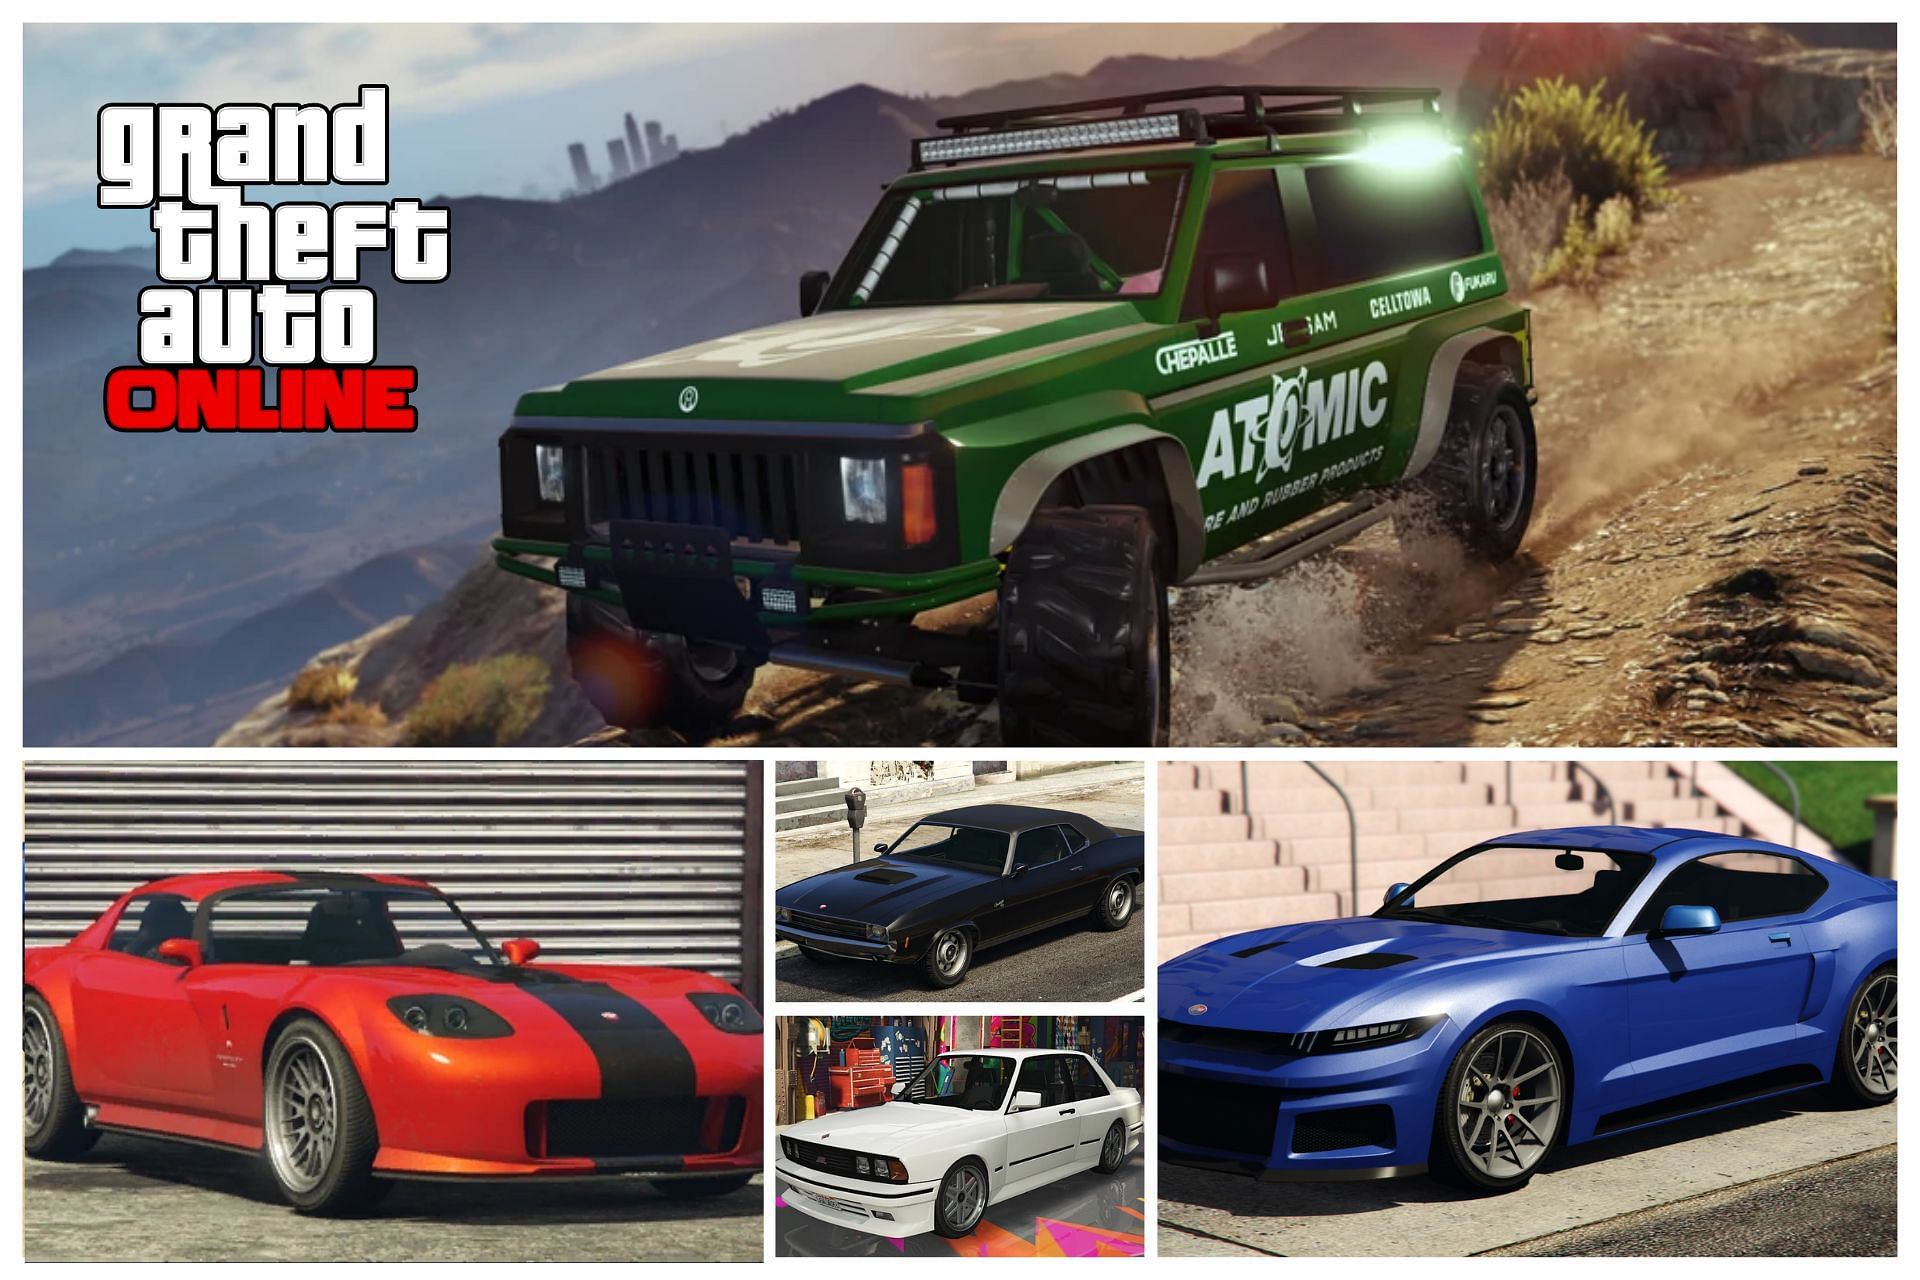 Five cars in GTA Online that custom car enthusiasts should look out for (Images via GTA Fandom)